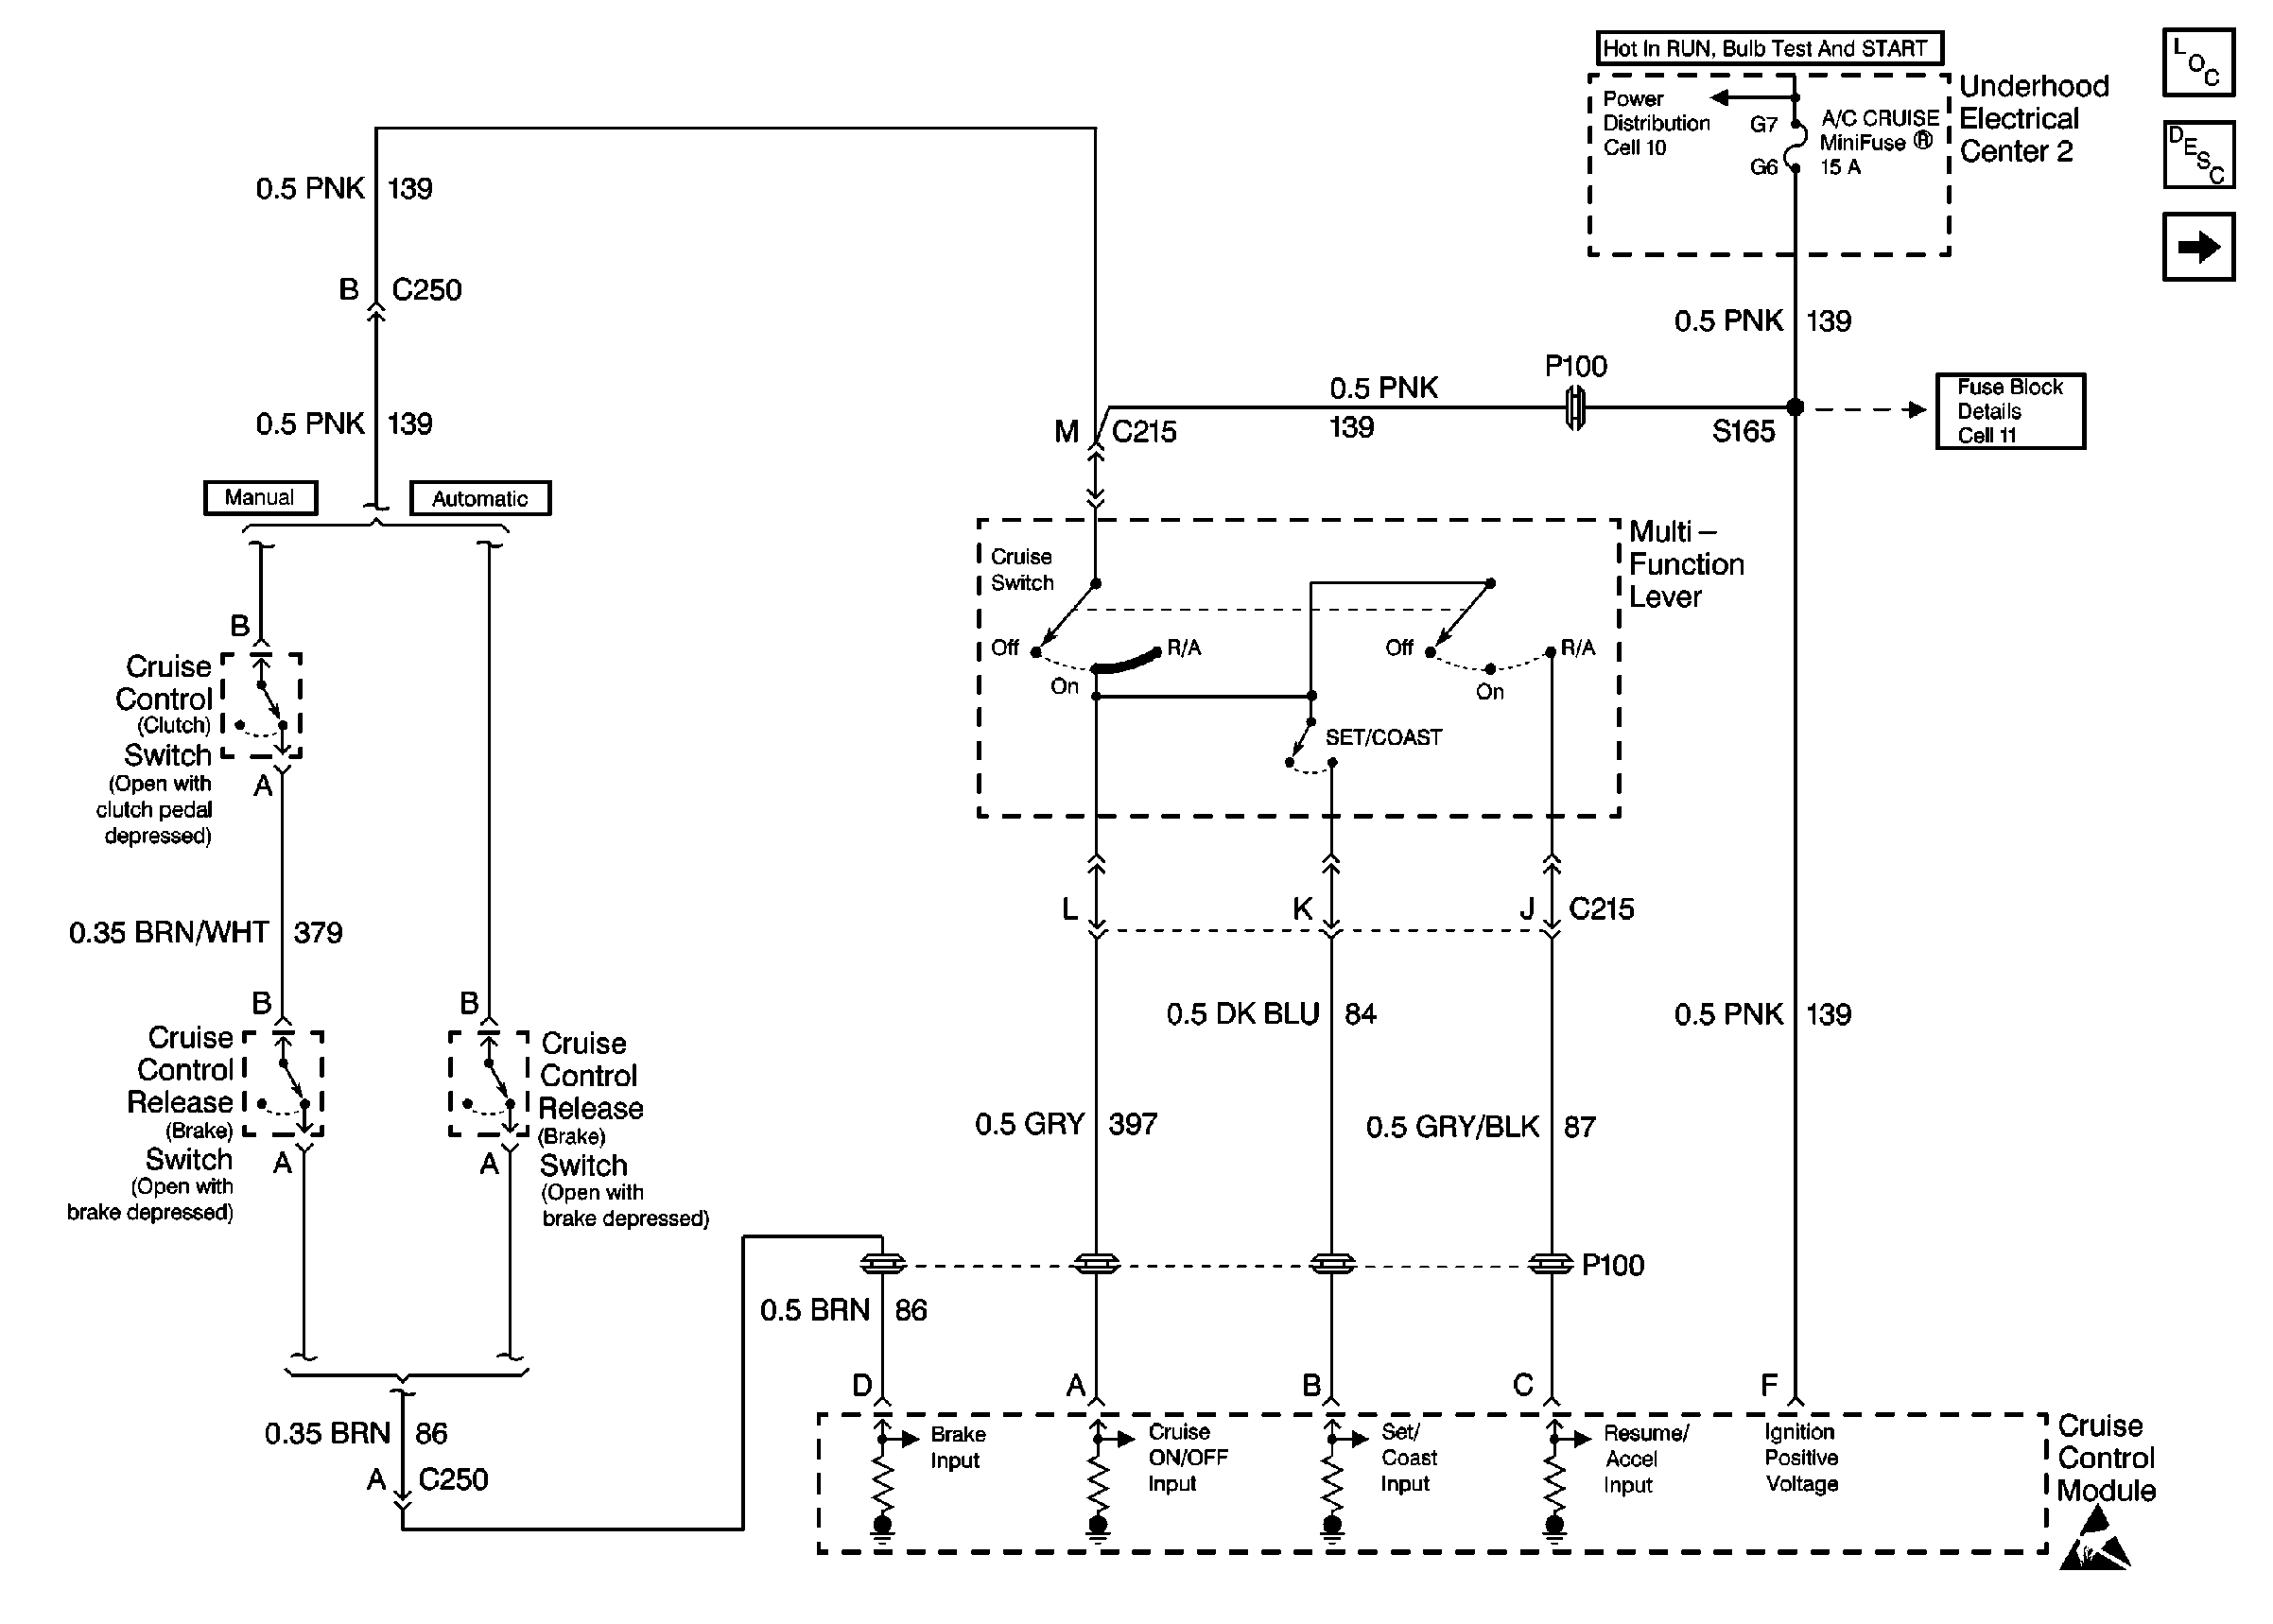 Wiring Diagram For Multiswitch from ls1tech.com